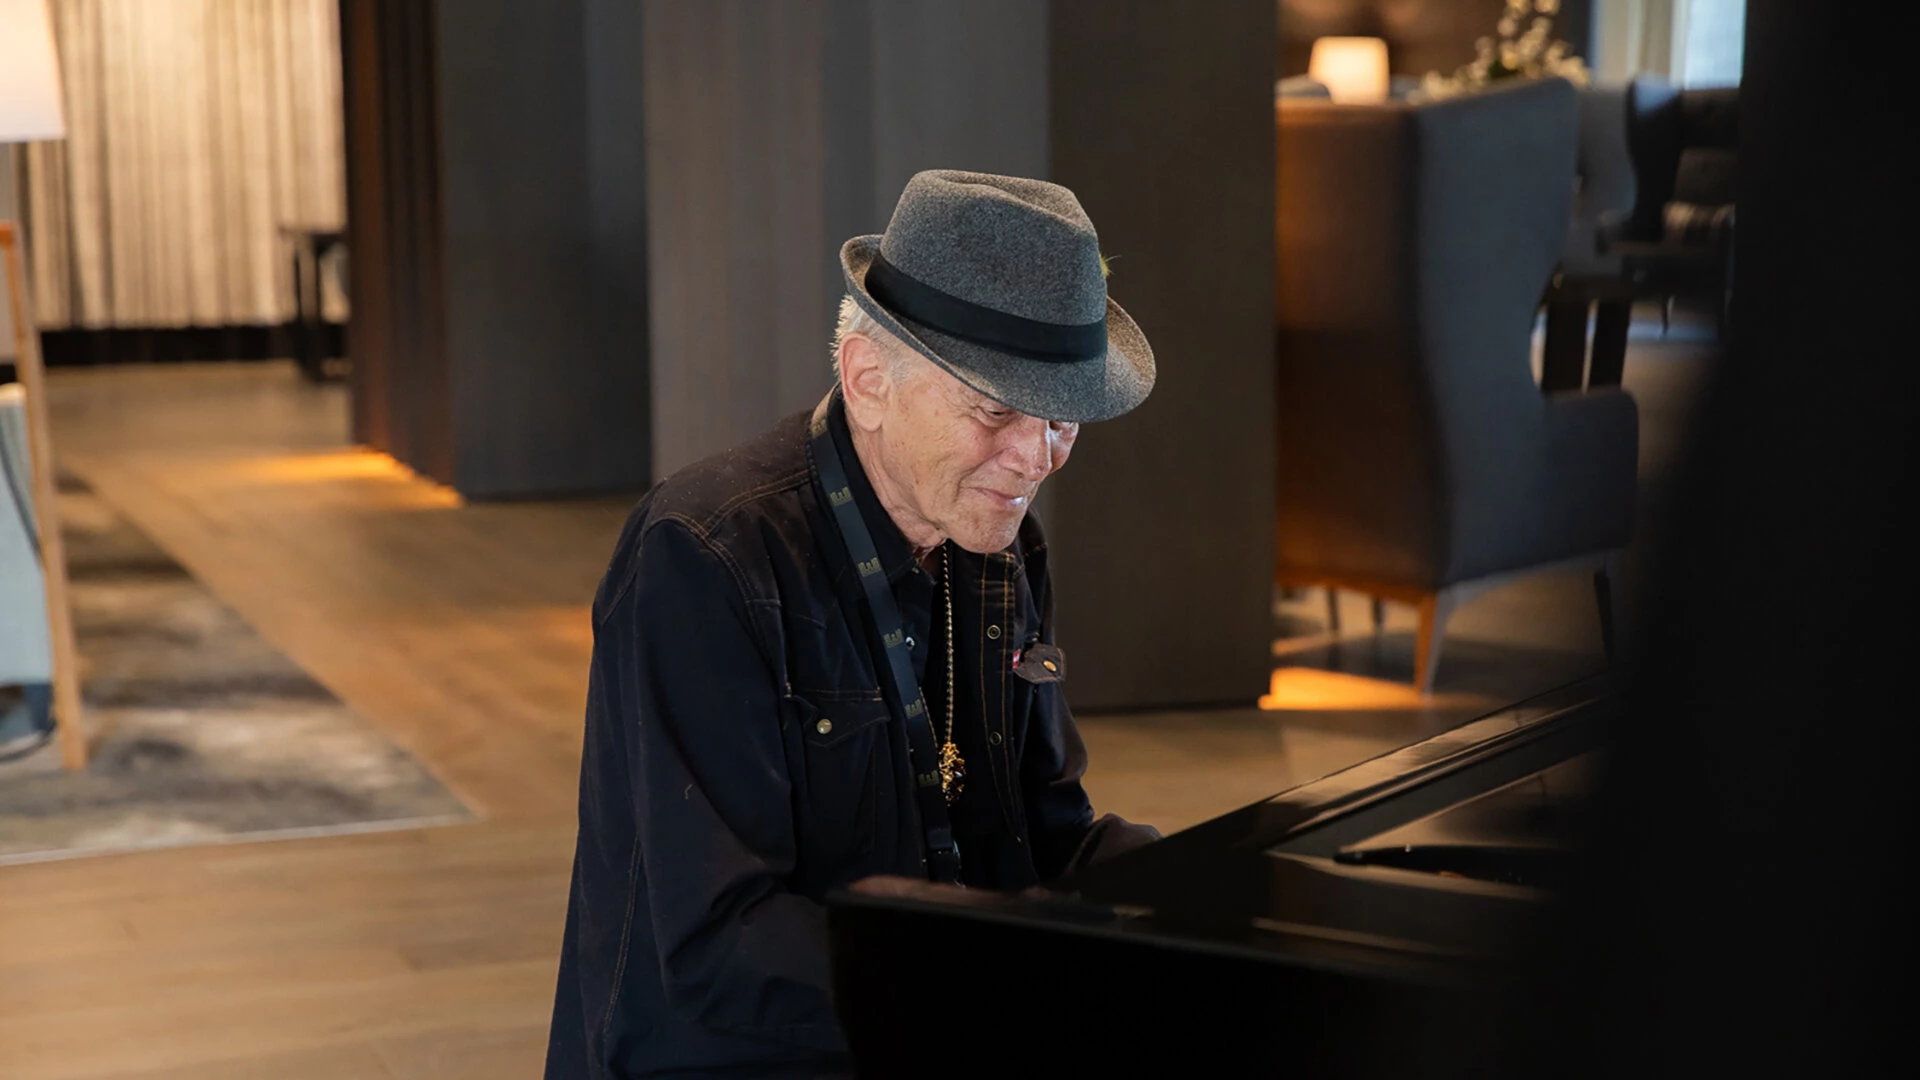 An old man playing on a grand piano